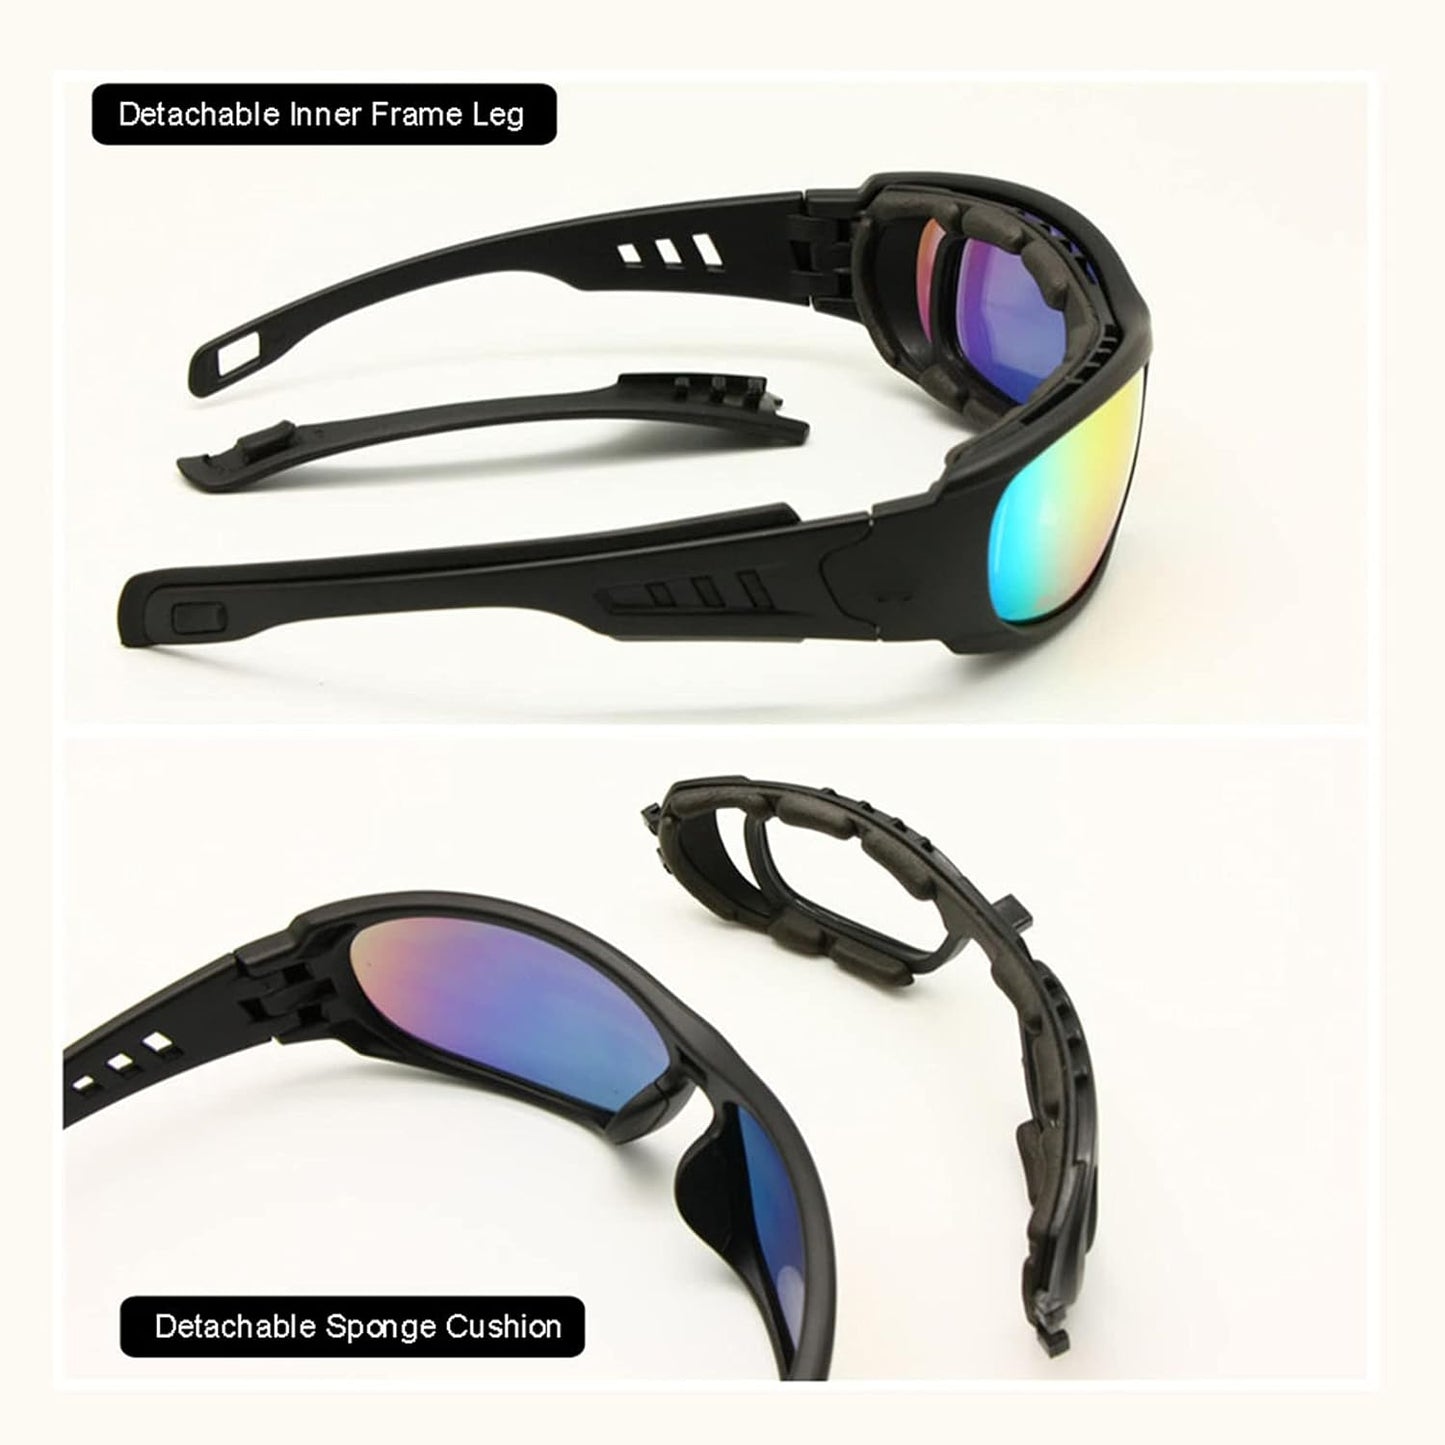 Ballistic Sunglasses with Rx Insert: The Ultimate Tactical Eyewear